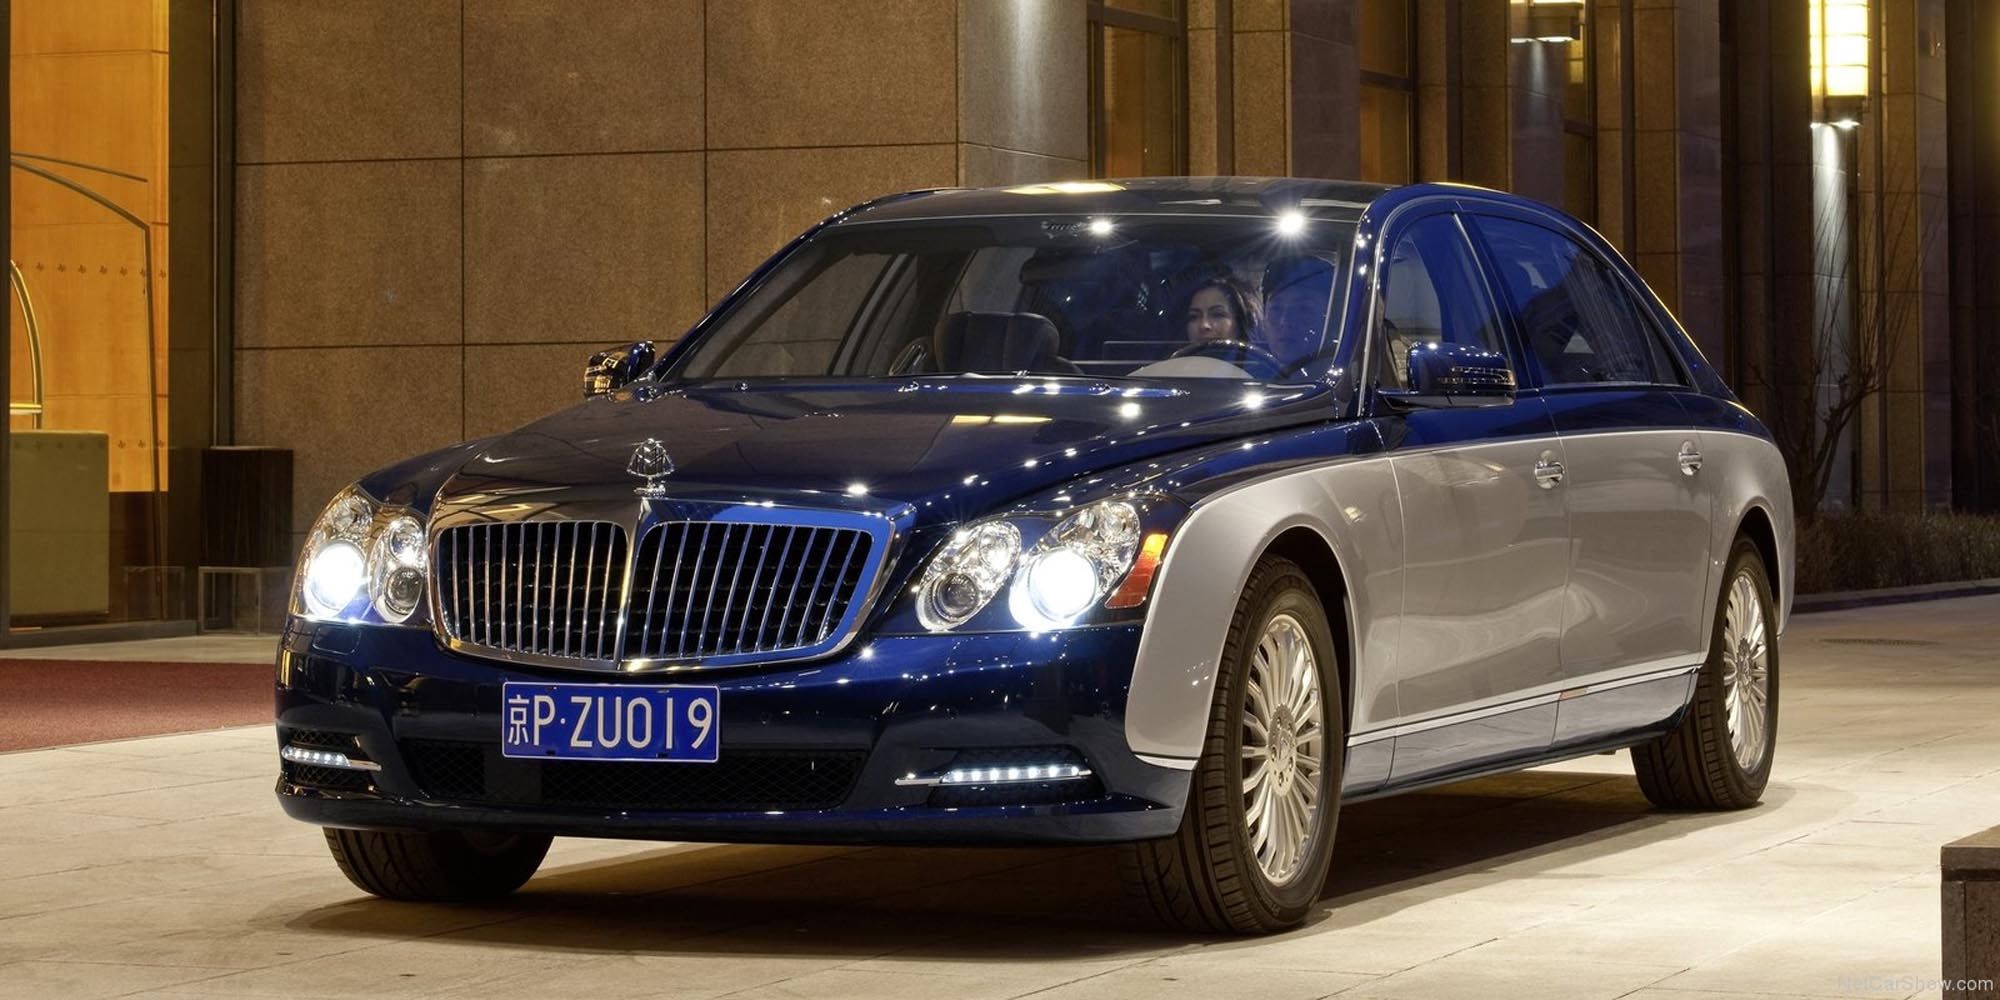 The Maybach 62 S in black and blue